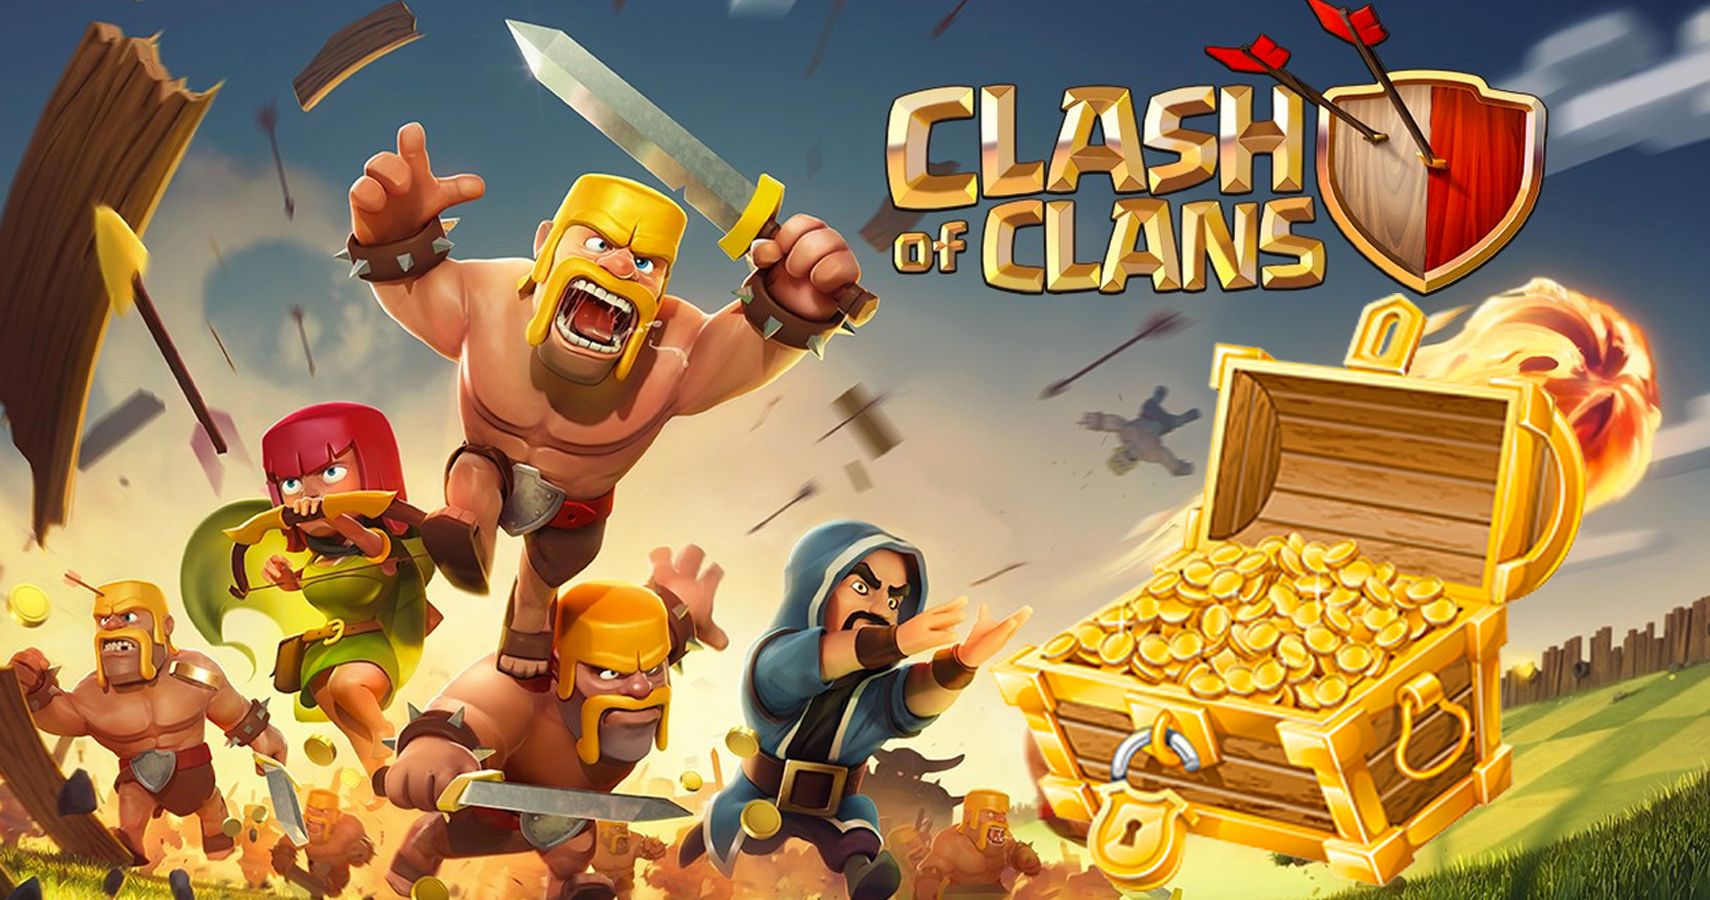 Clans of clans коды. Event Pass and Gold Pass Clash of Clans.